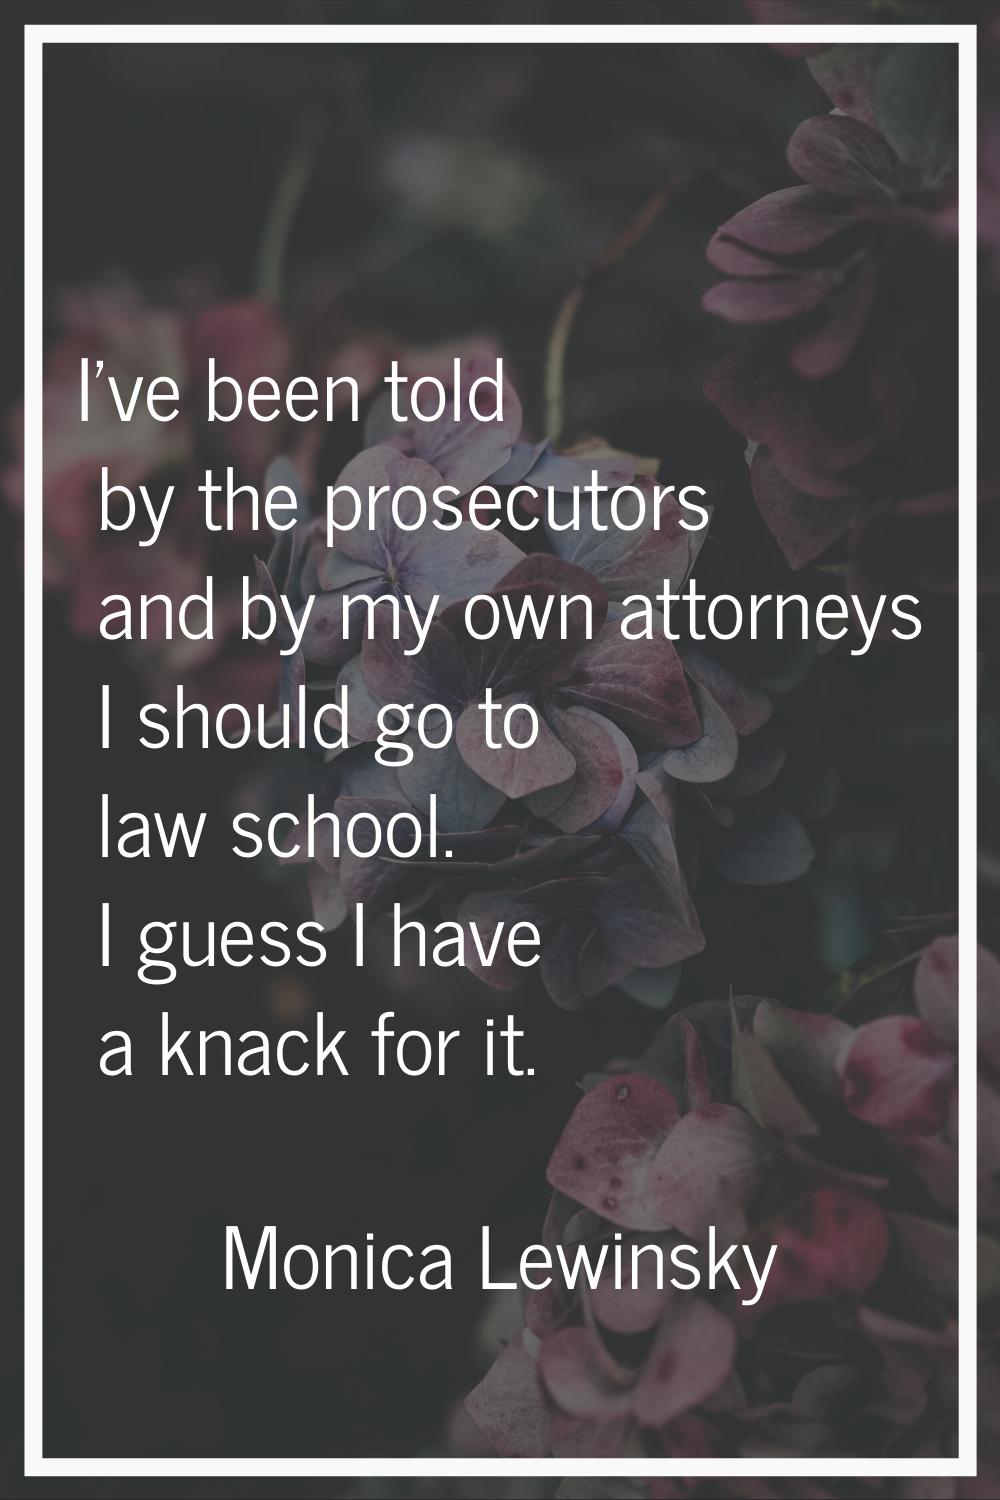 I've been told by the prosecutors and by my own attorneys I should go to law school. I guess I have